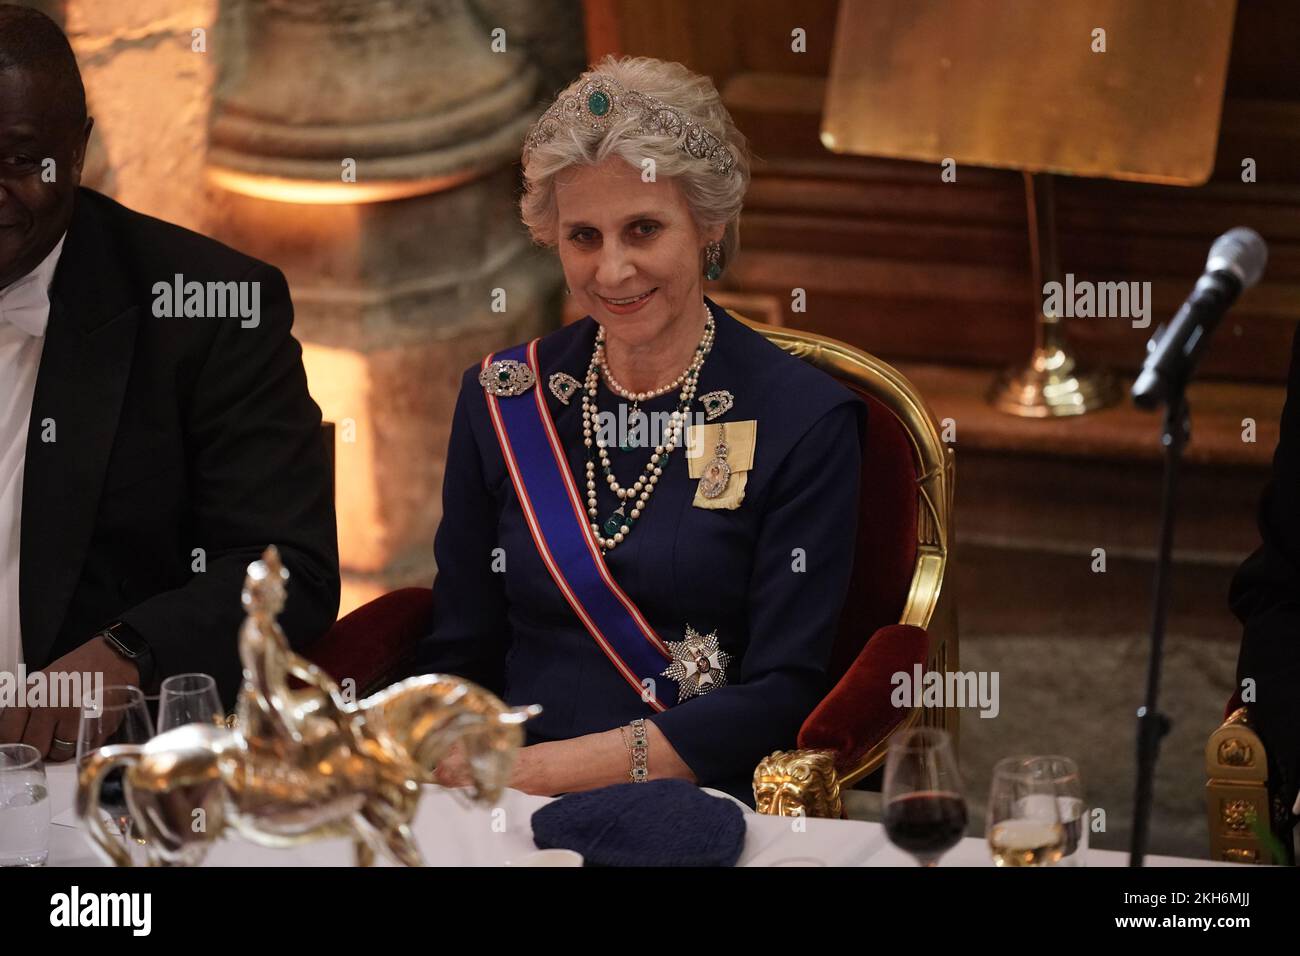 The Duchess of Gloucester during a banquet at the Guildhall in London, given by the Lord Mayor and City of London Corporation, for President Cyril Ramaphosa of South Africa, during his state visit to the UK. Picture date: Wednesday November 23, 2022. Stock Photo